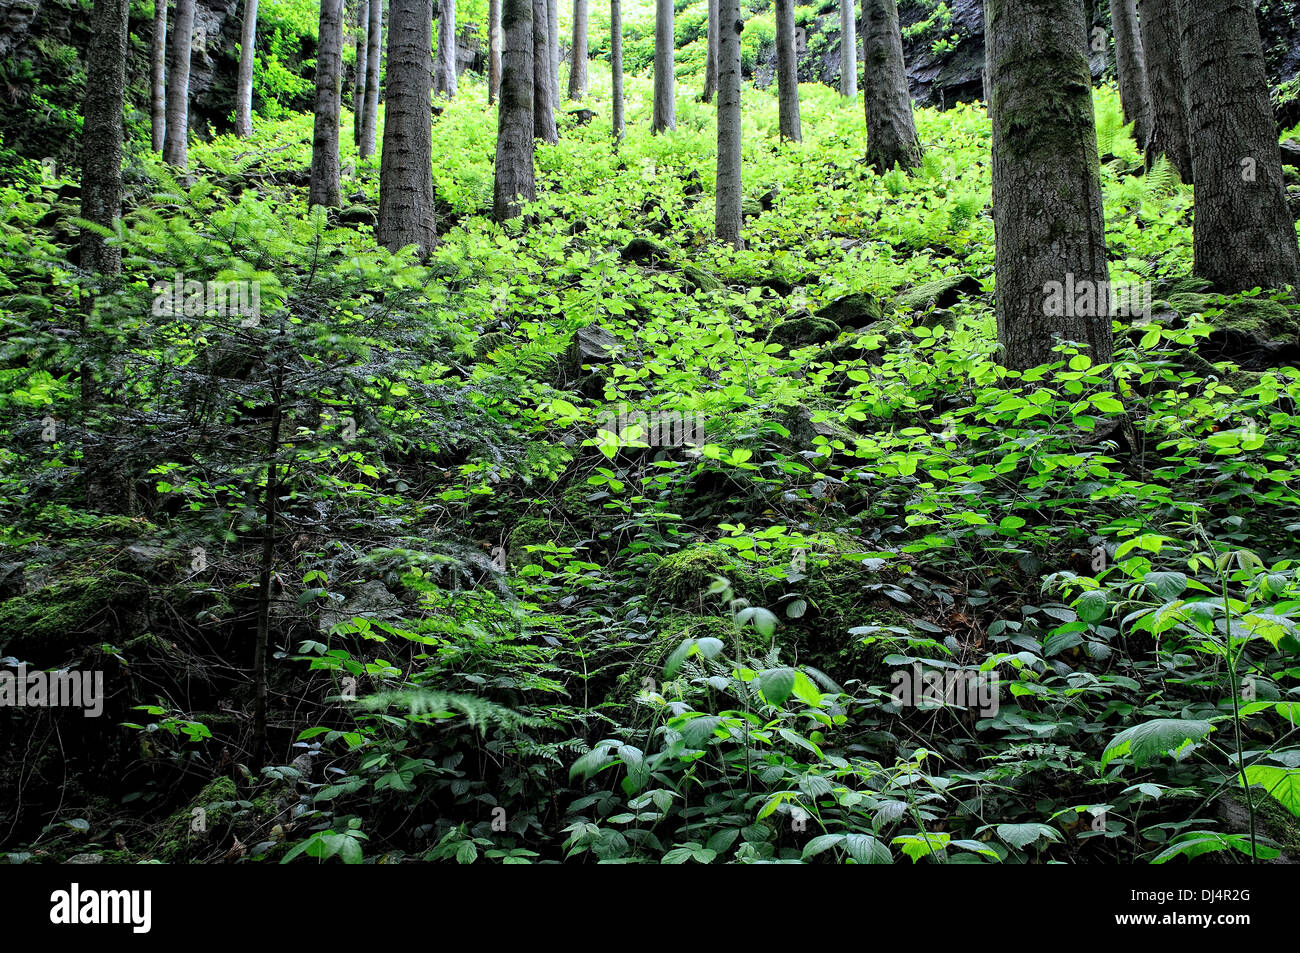 Montane forest on steep slopes Stock Photo